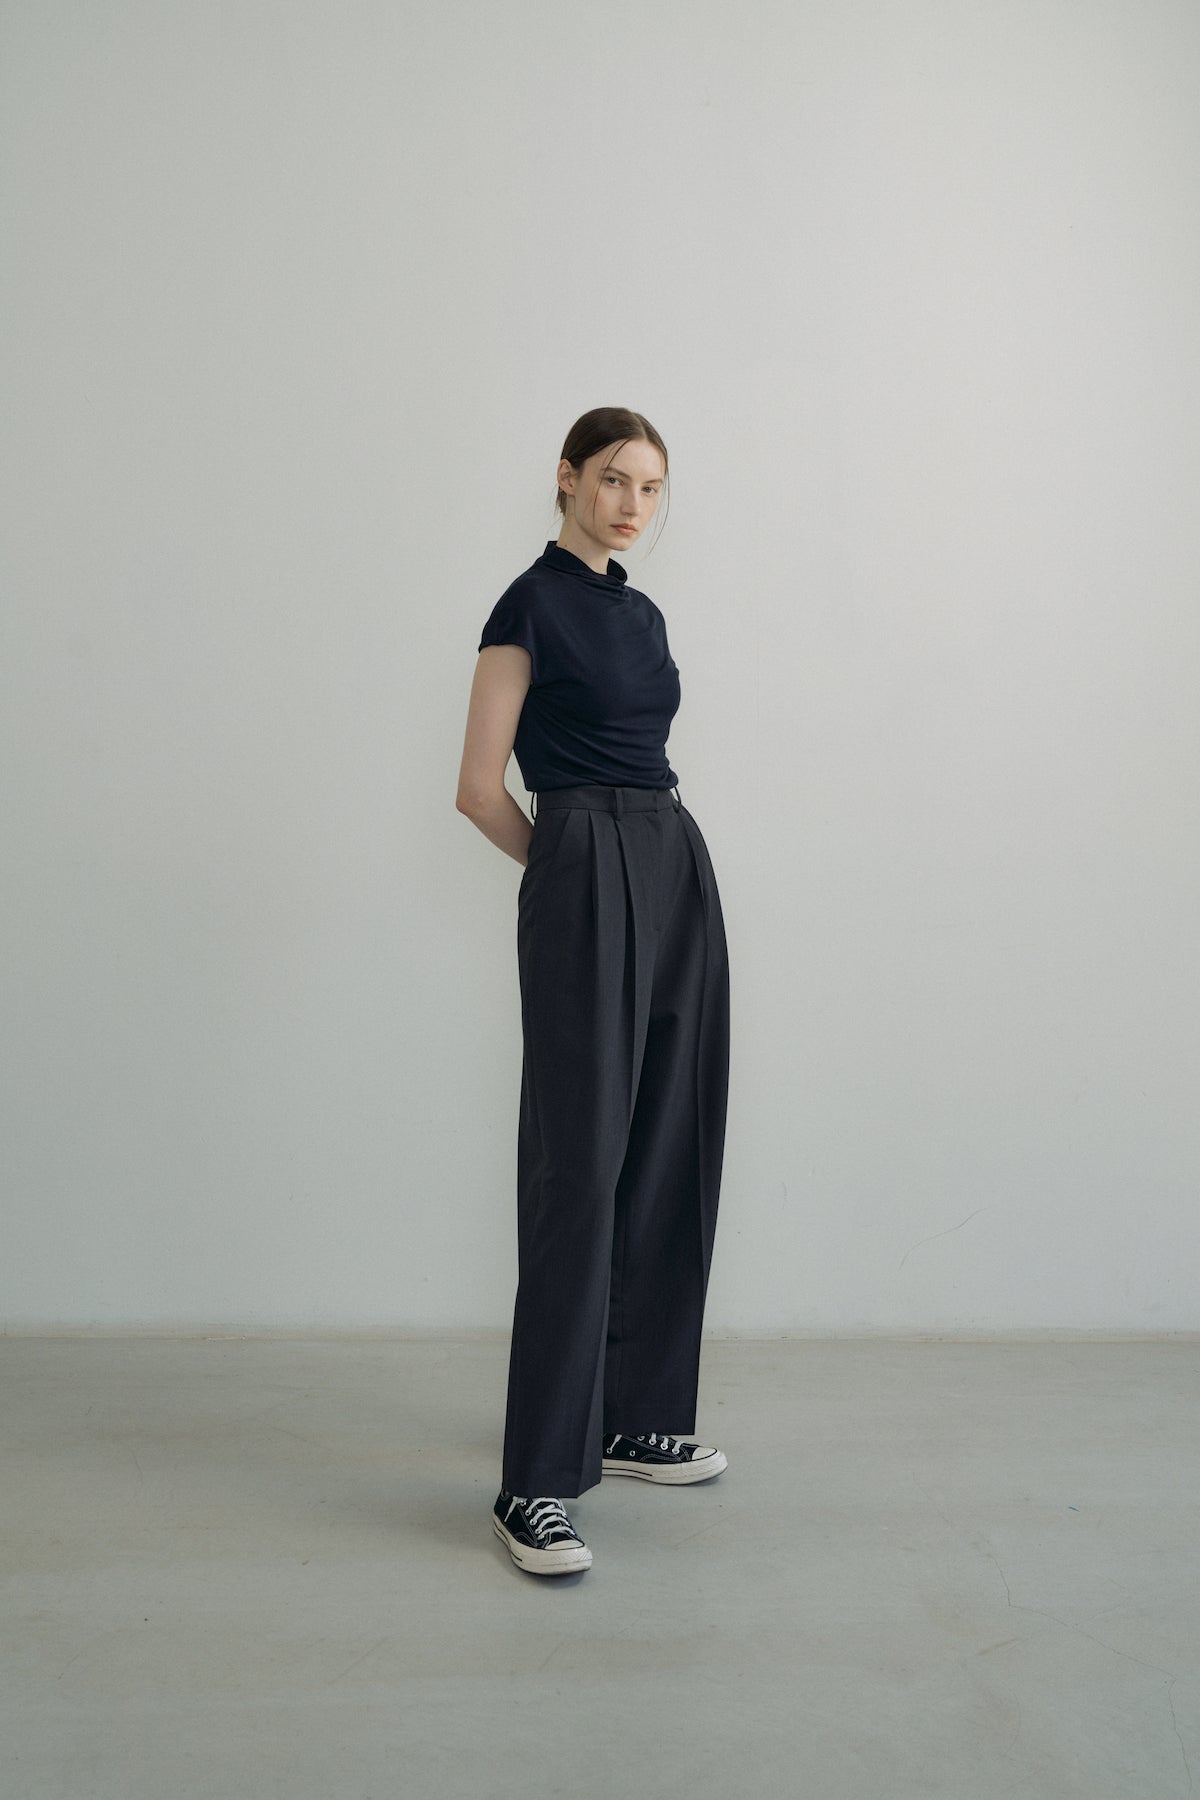 Low-rise Pintuck Pants In Charcoal